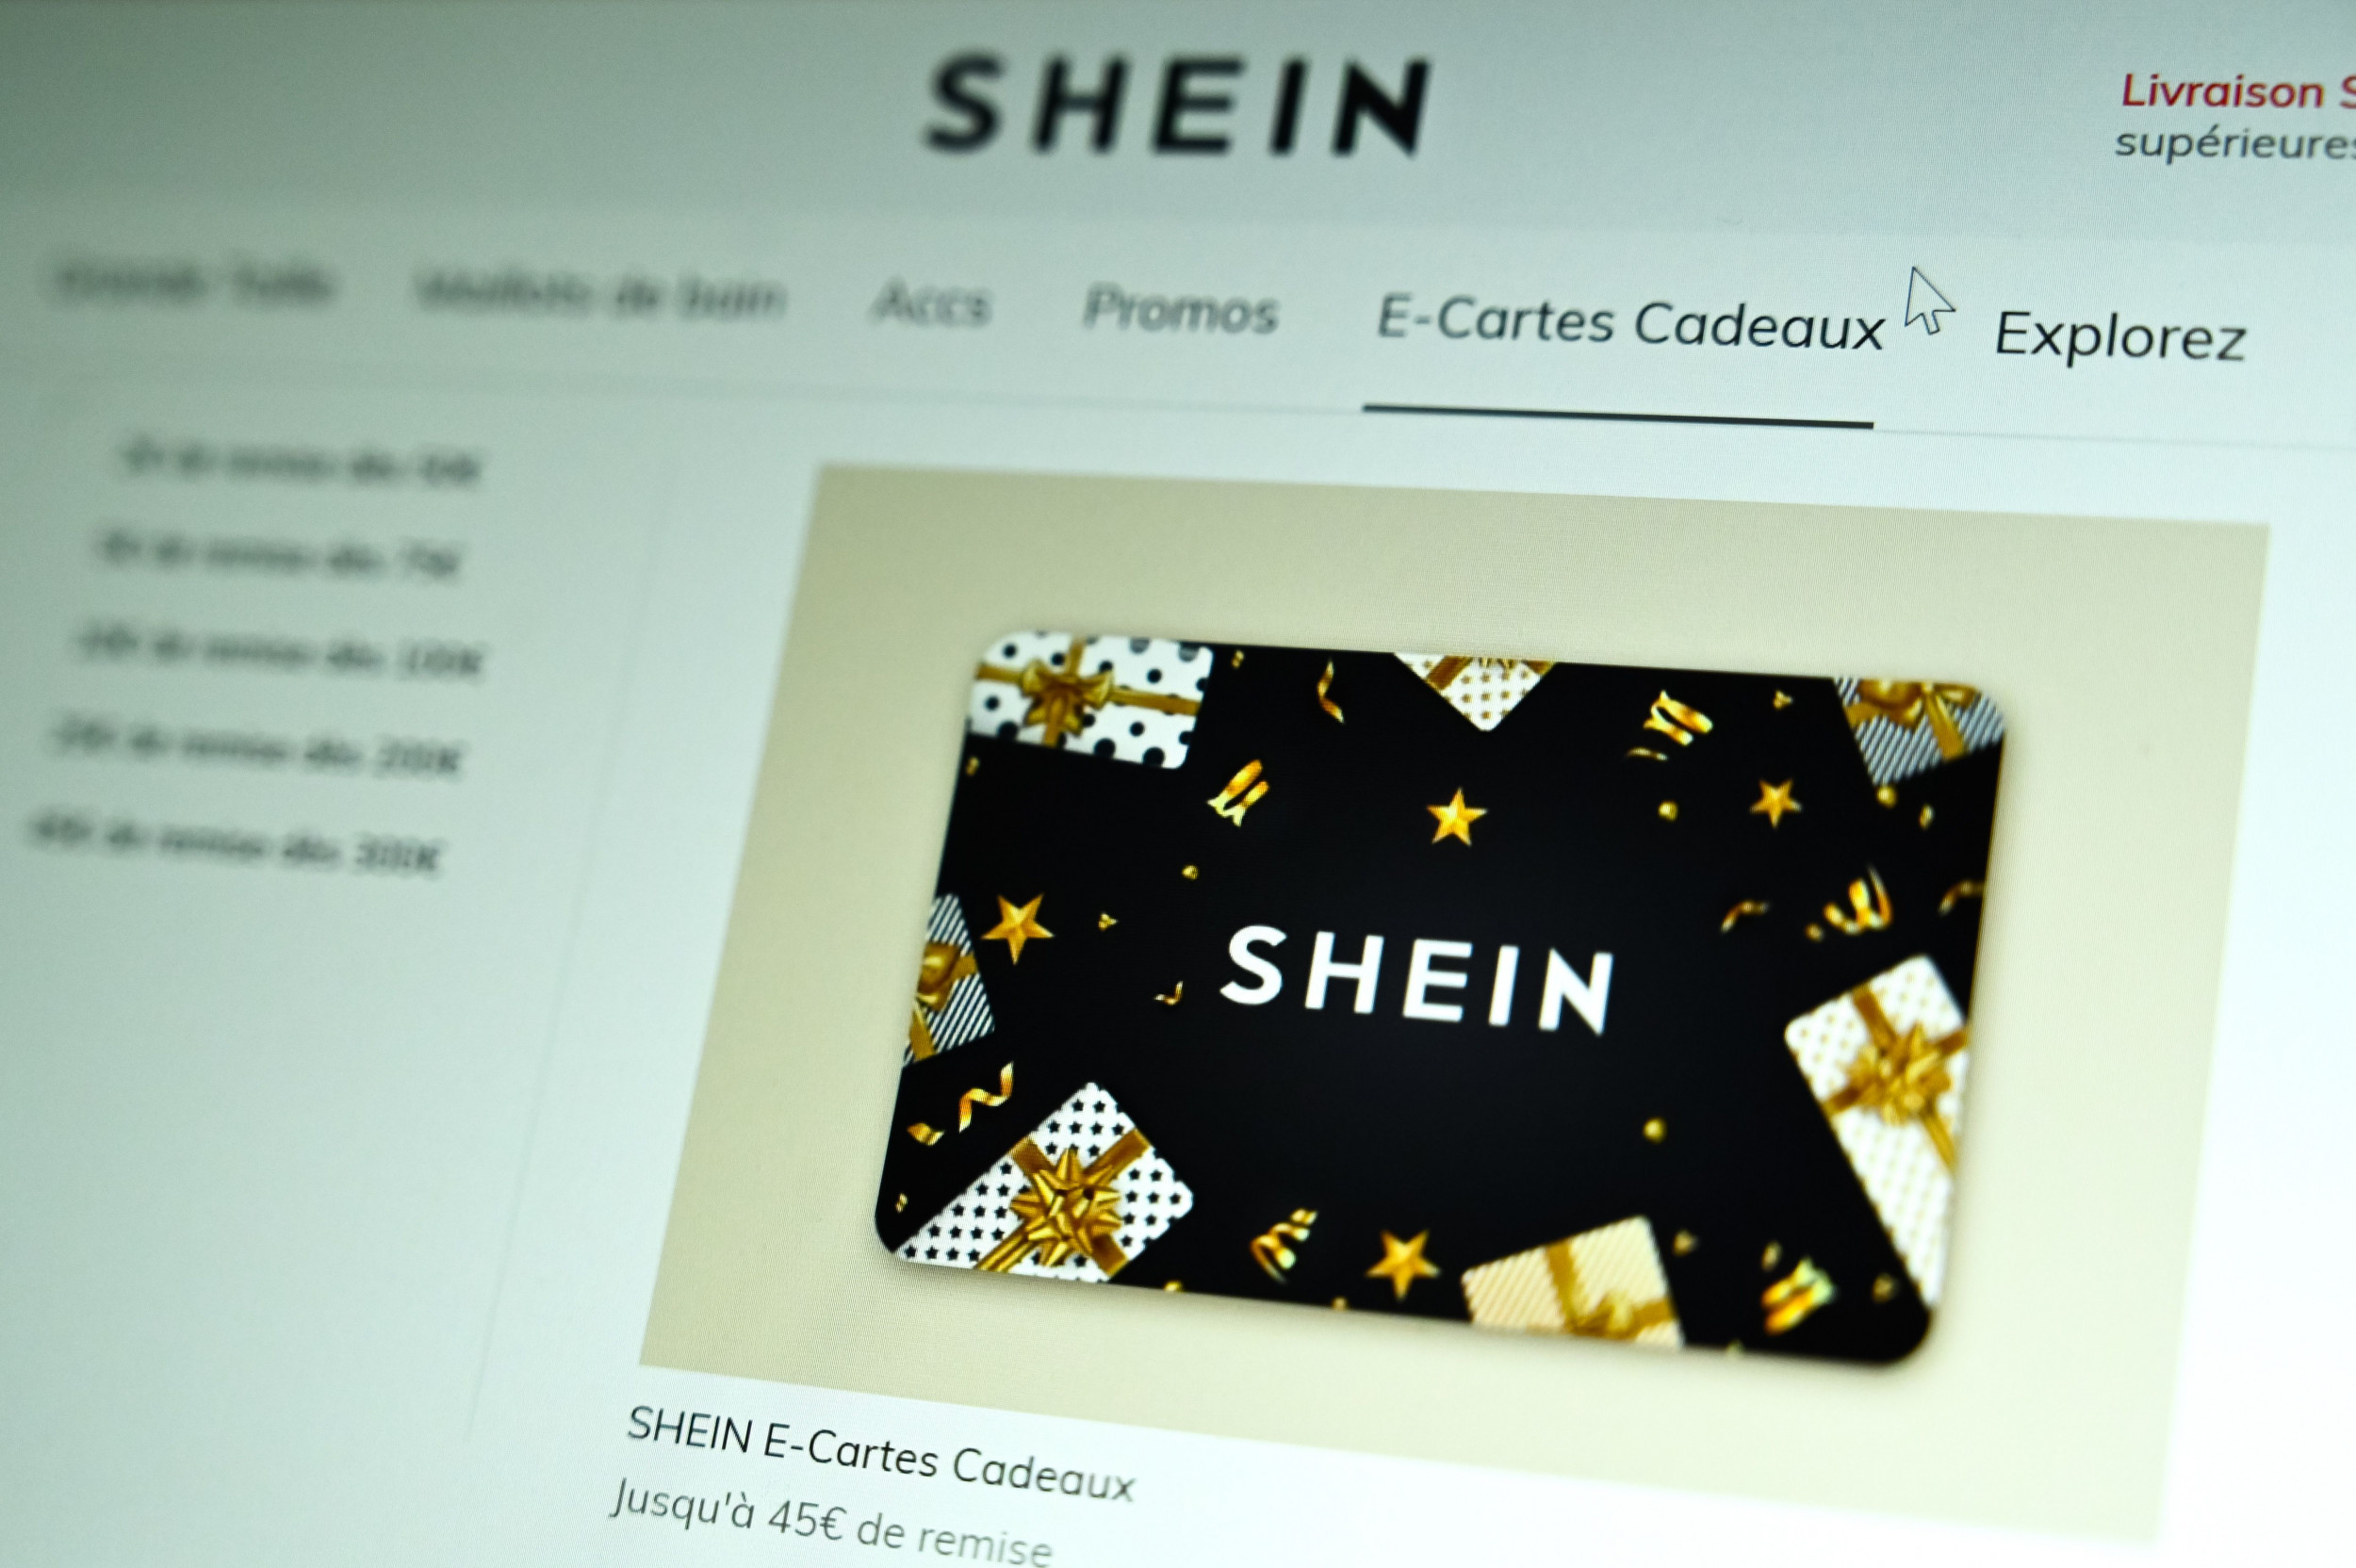 Woman Says SHEIN Product Sent Her to Urgent Care With 'Chemical